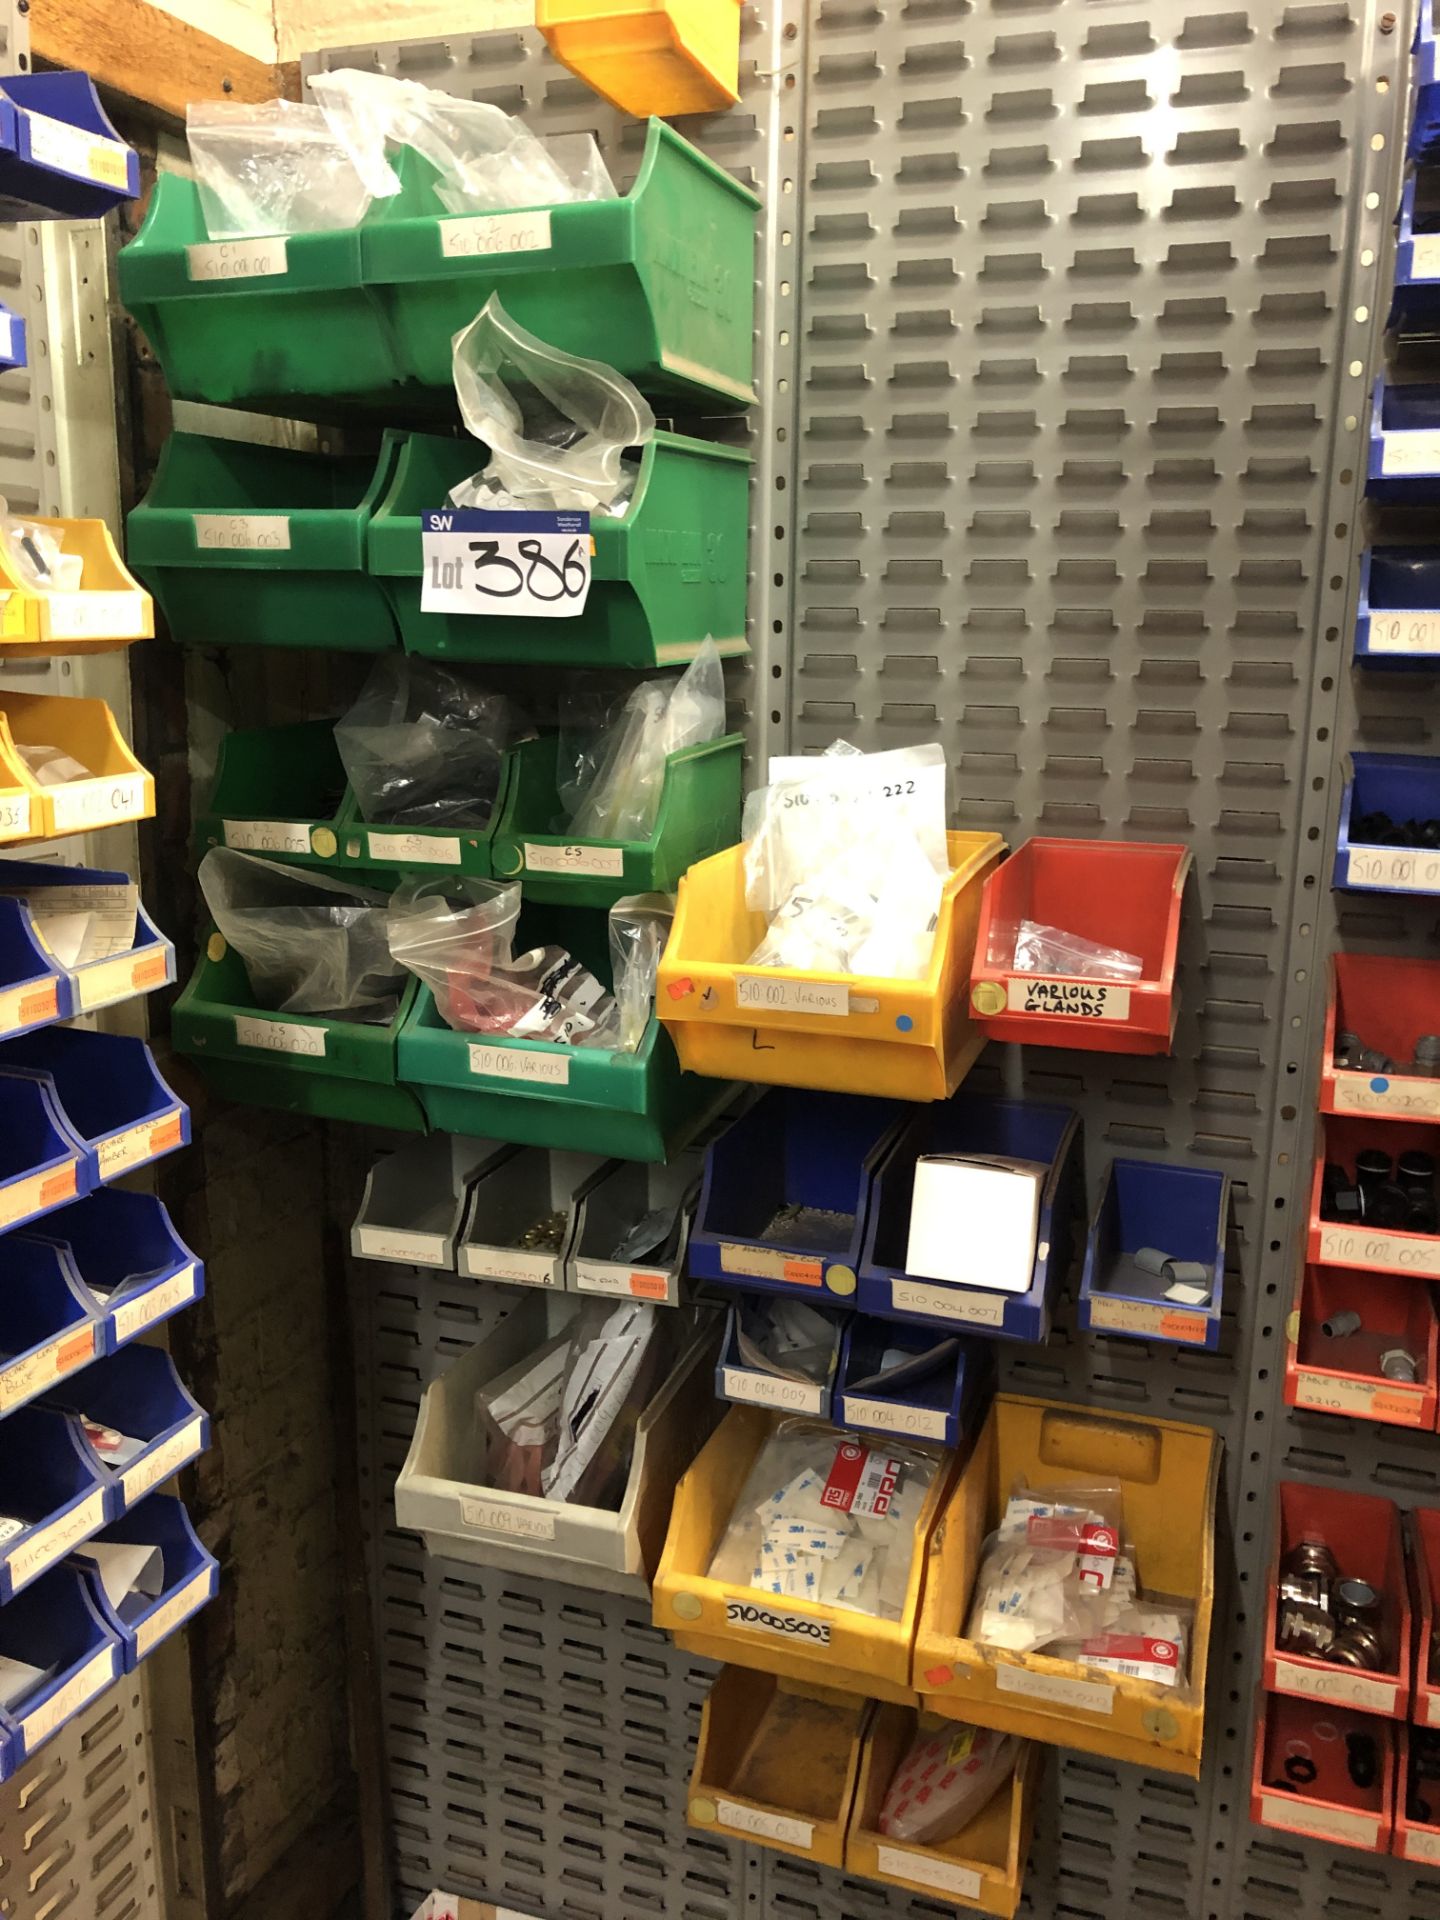 Quantity of Fastenings & Fittings, as set out in plastic stacking bins on one run of rack